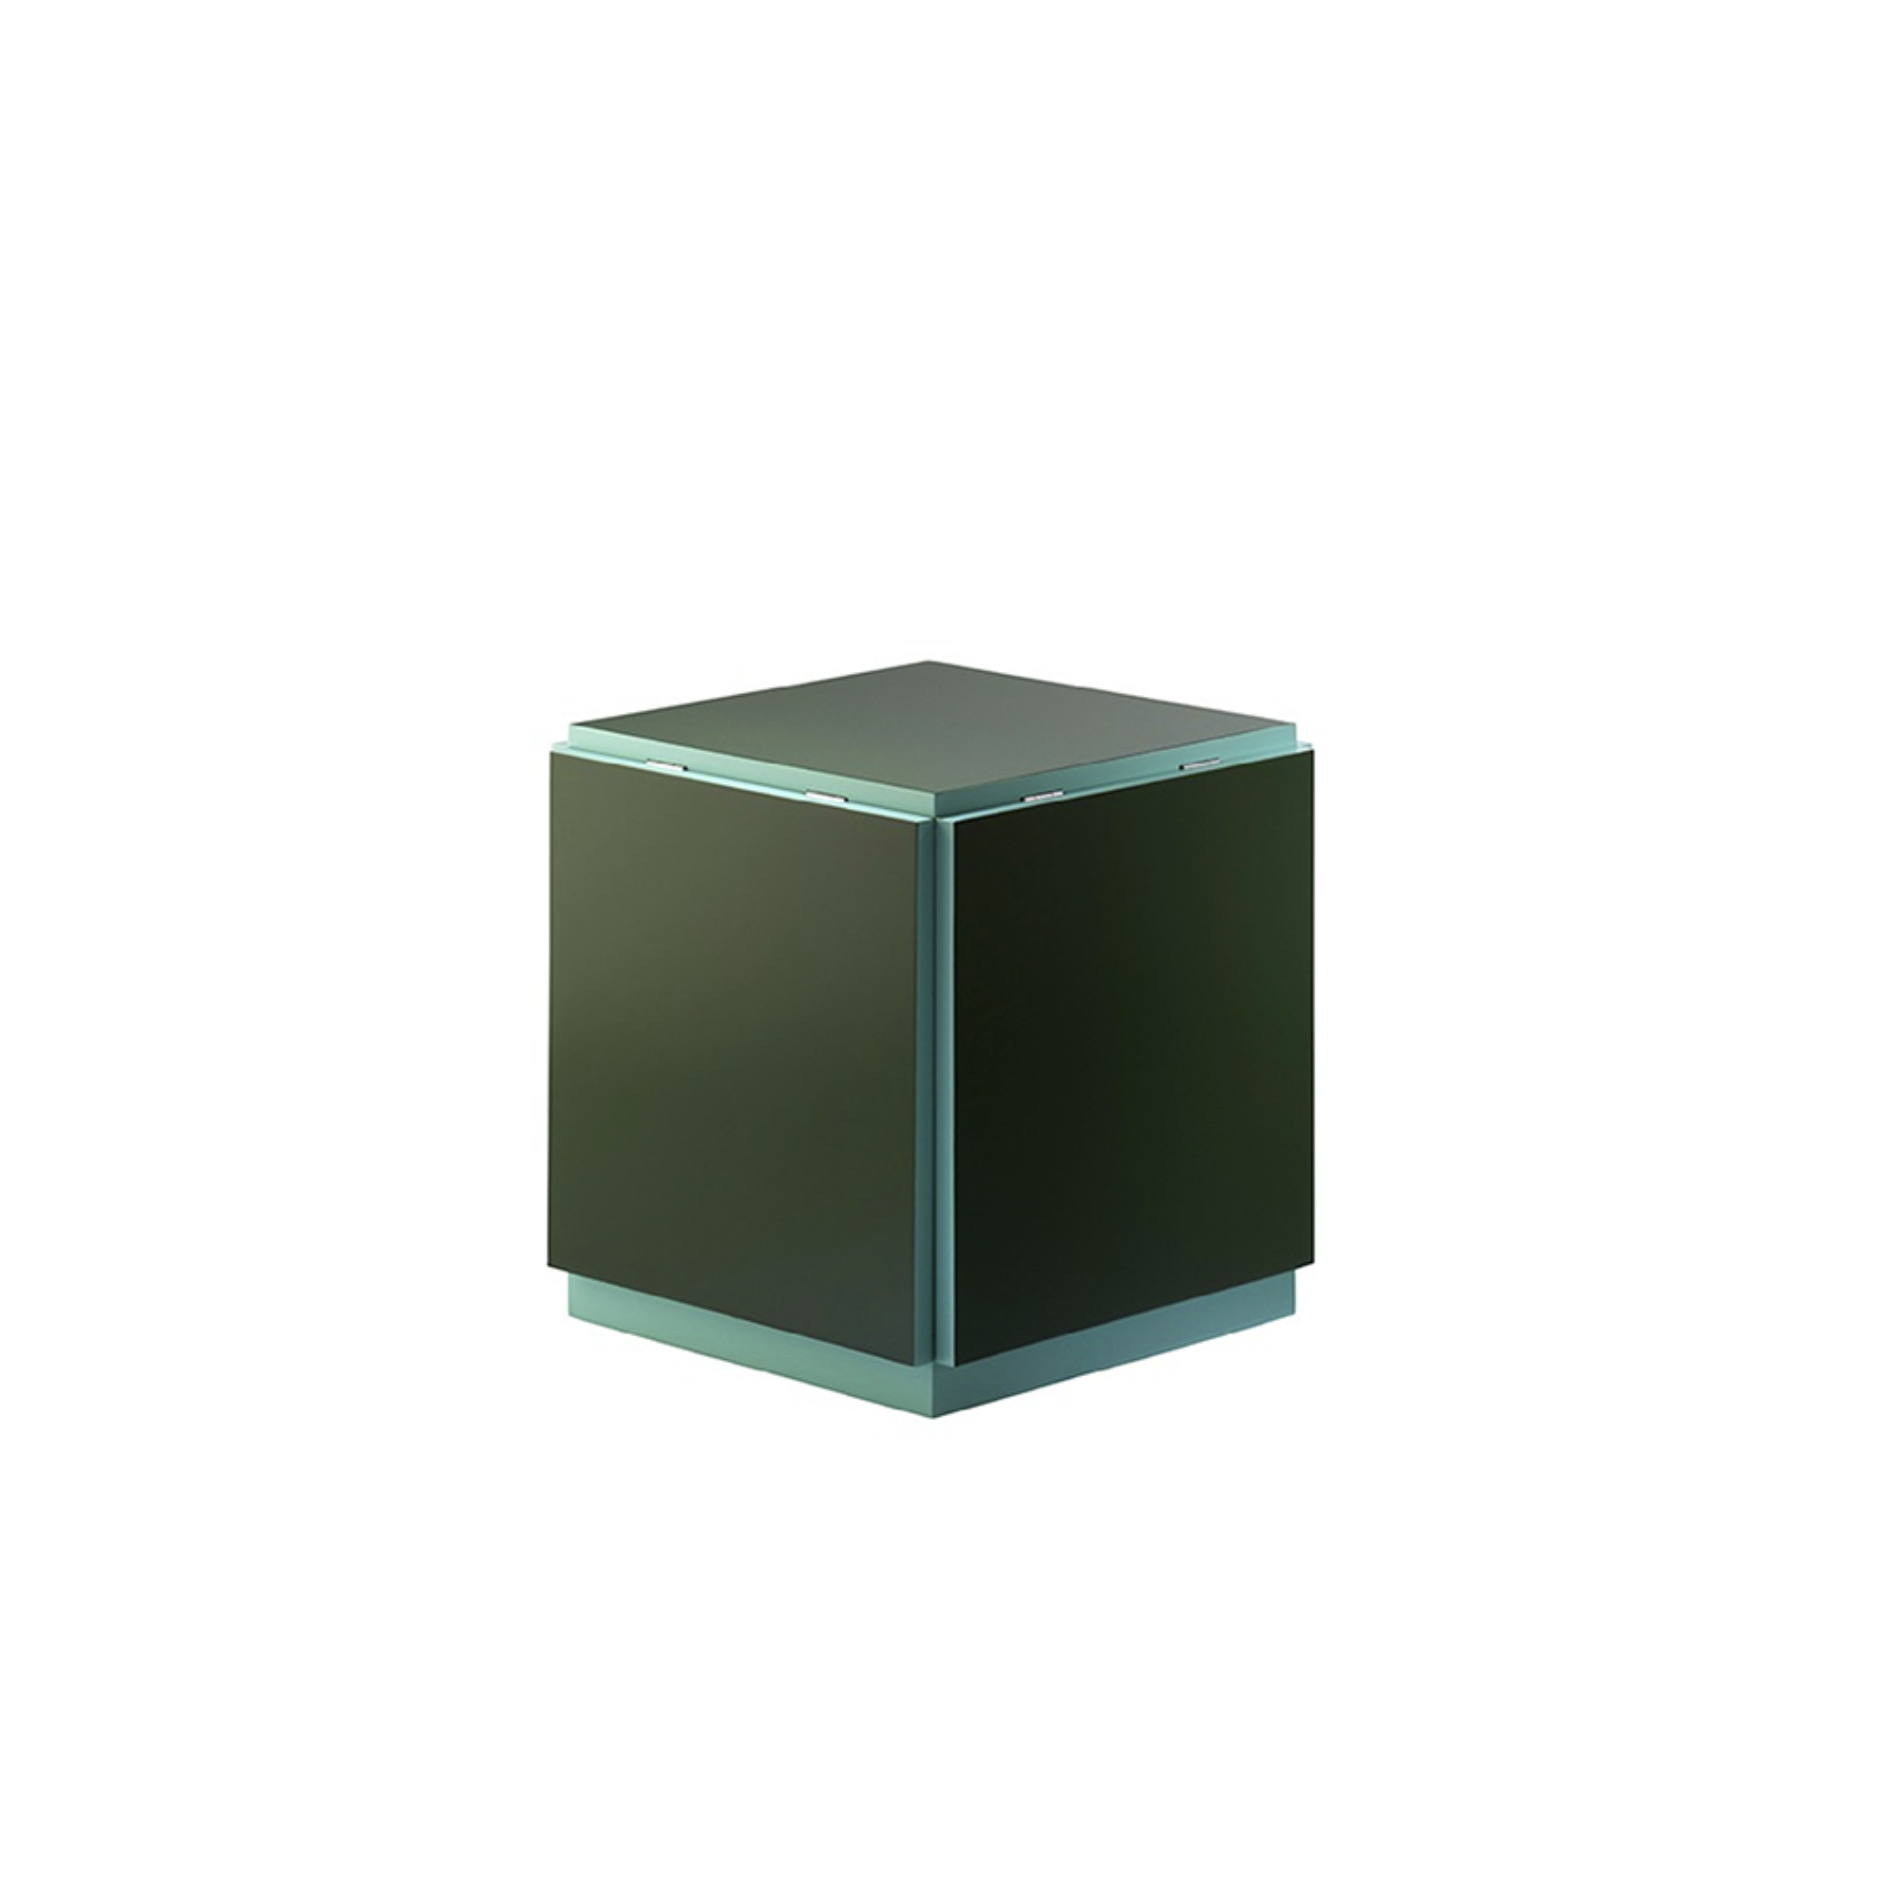 TECTA [Outlet|DP] K10N Table Ver 4 Edition - Design 3 Green